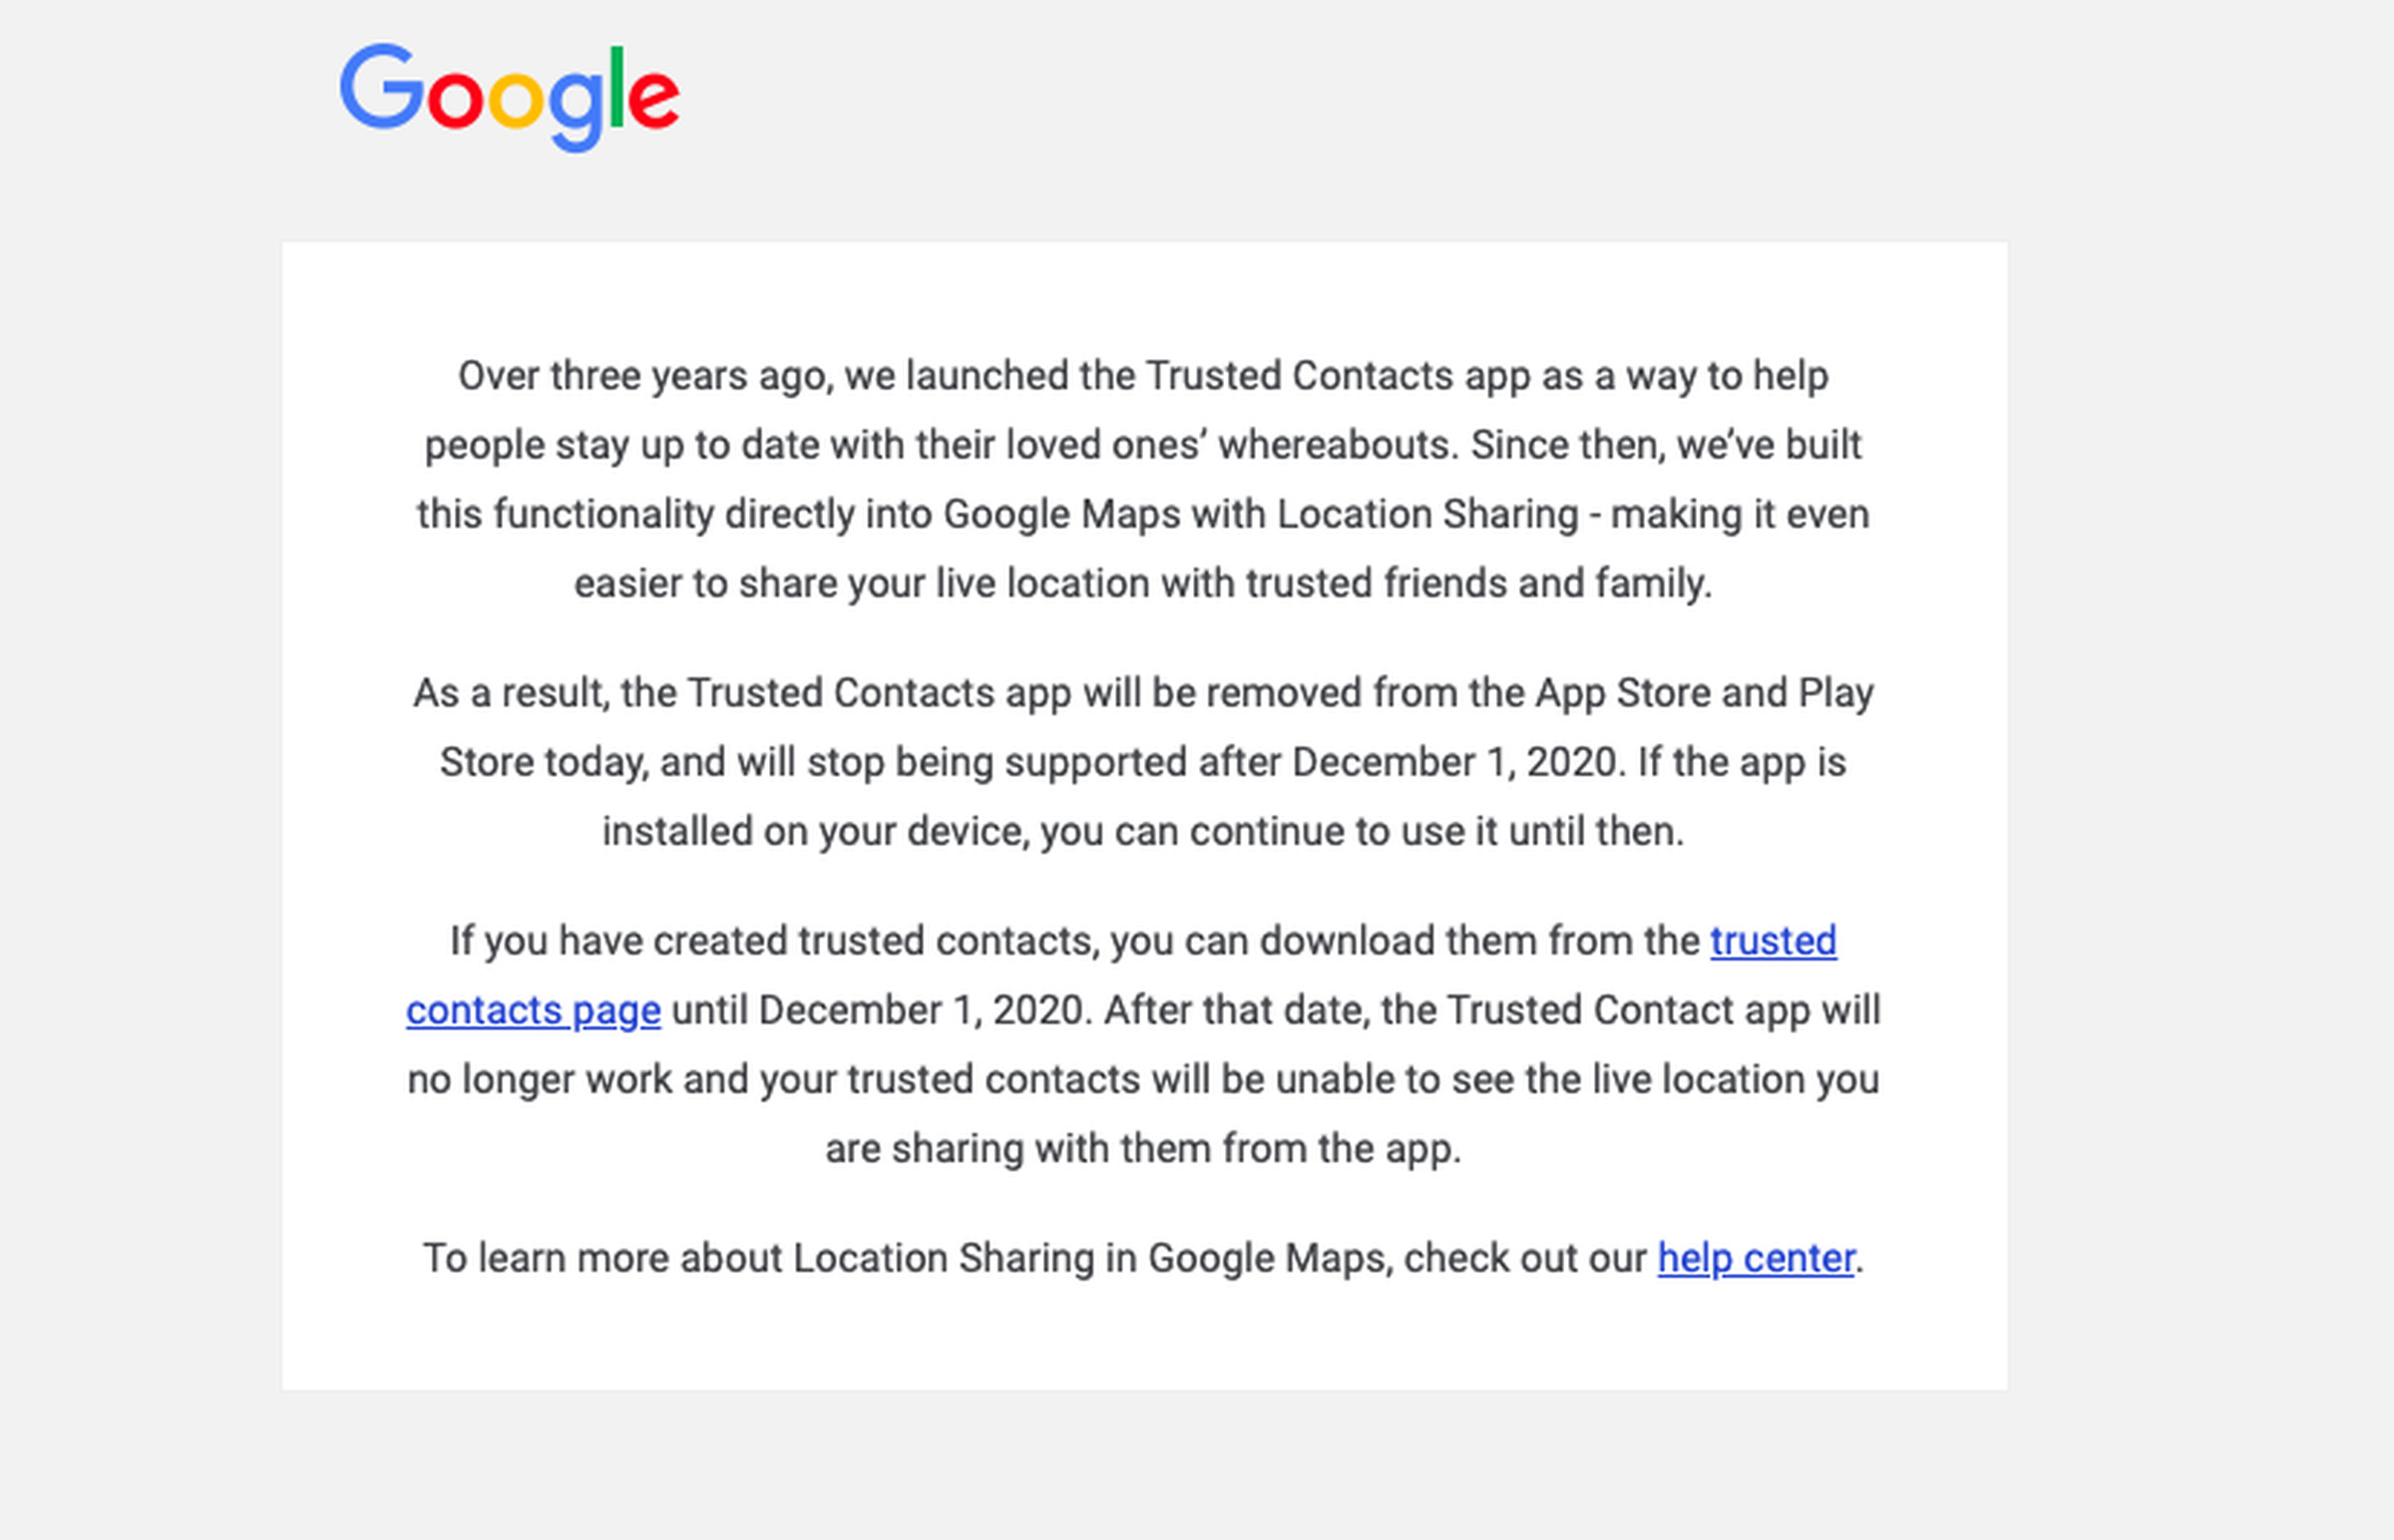 Google’s email announcement